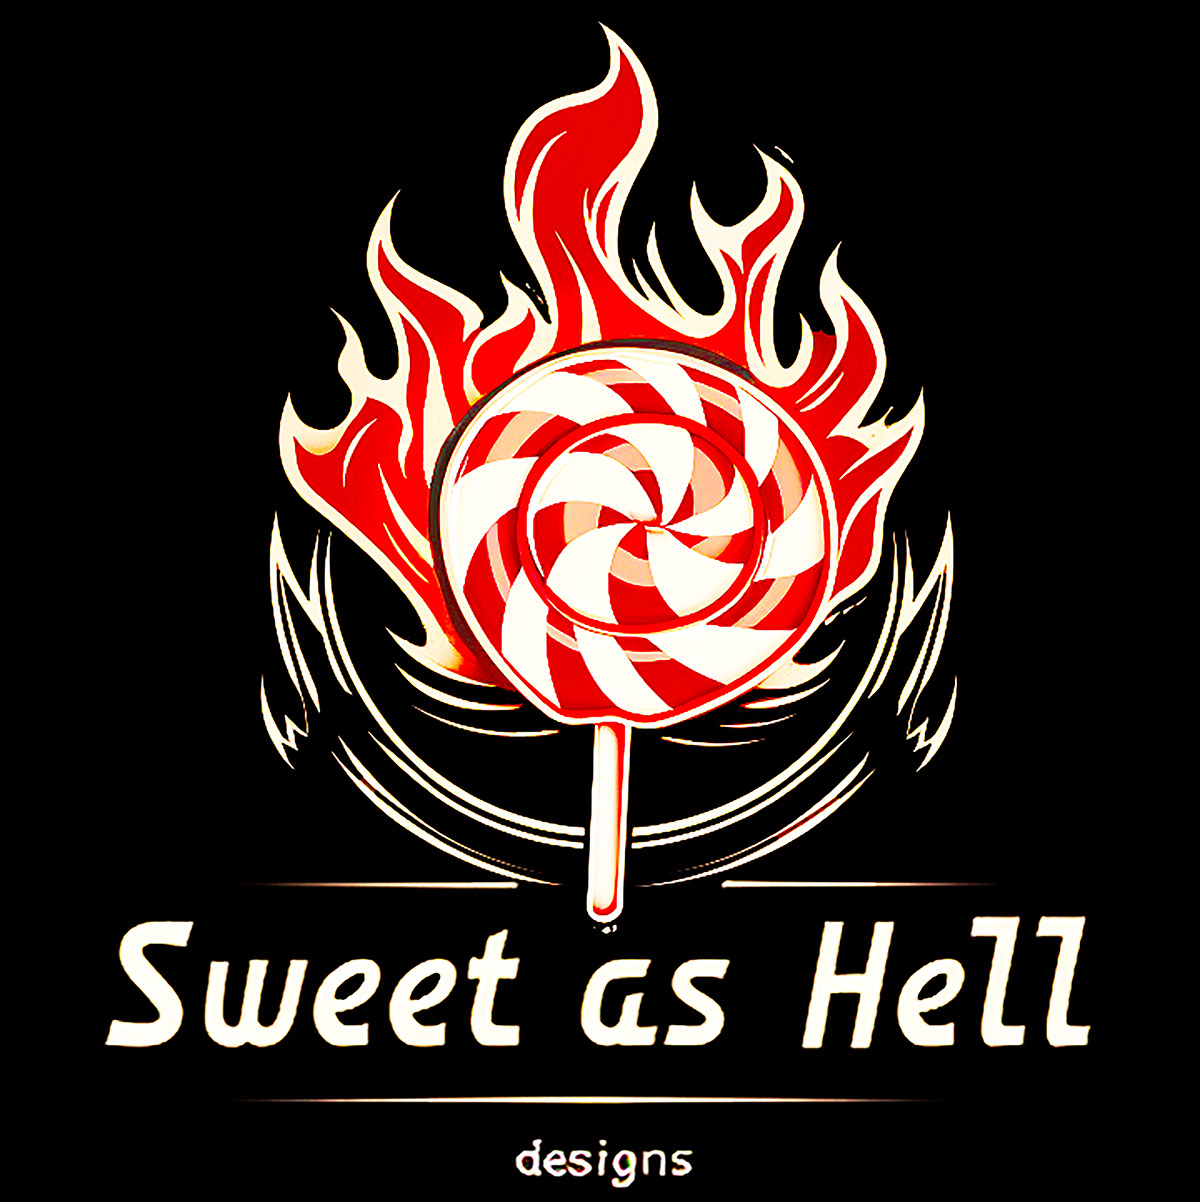 Sweet_As_Hell_Designs_Licensable_Ruffian_no_4 rendition image